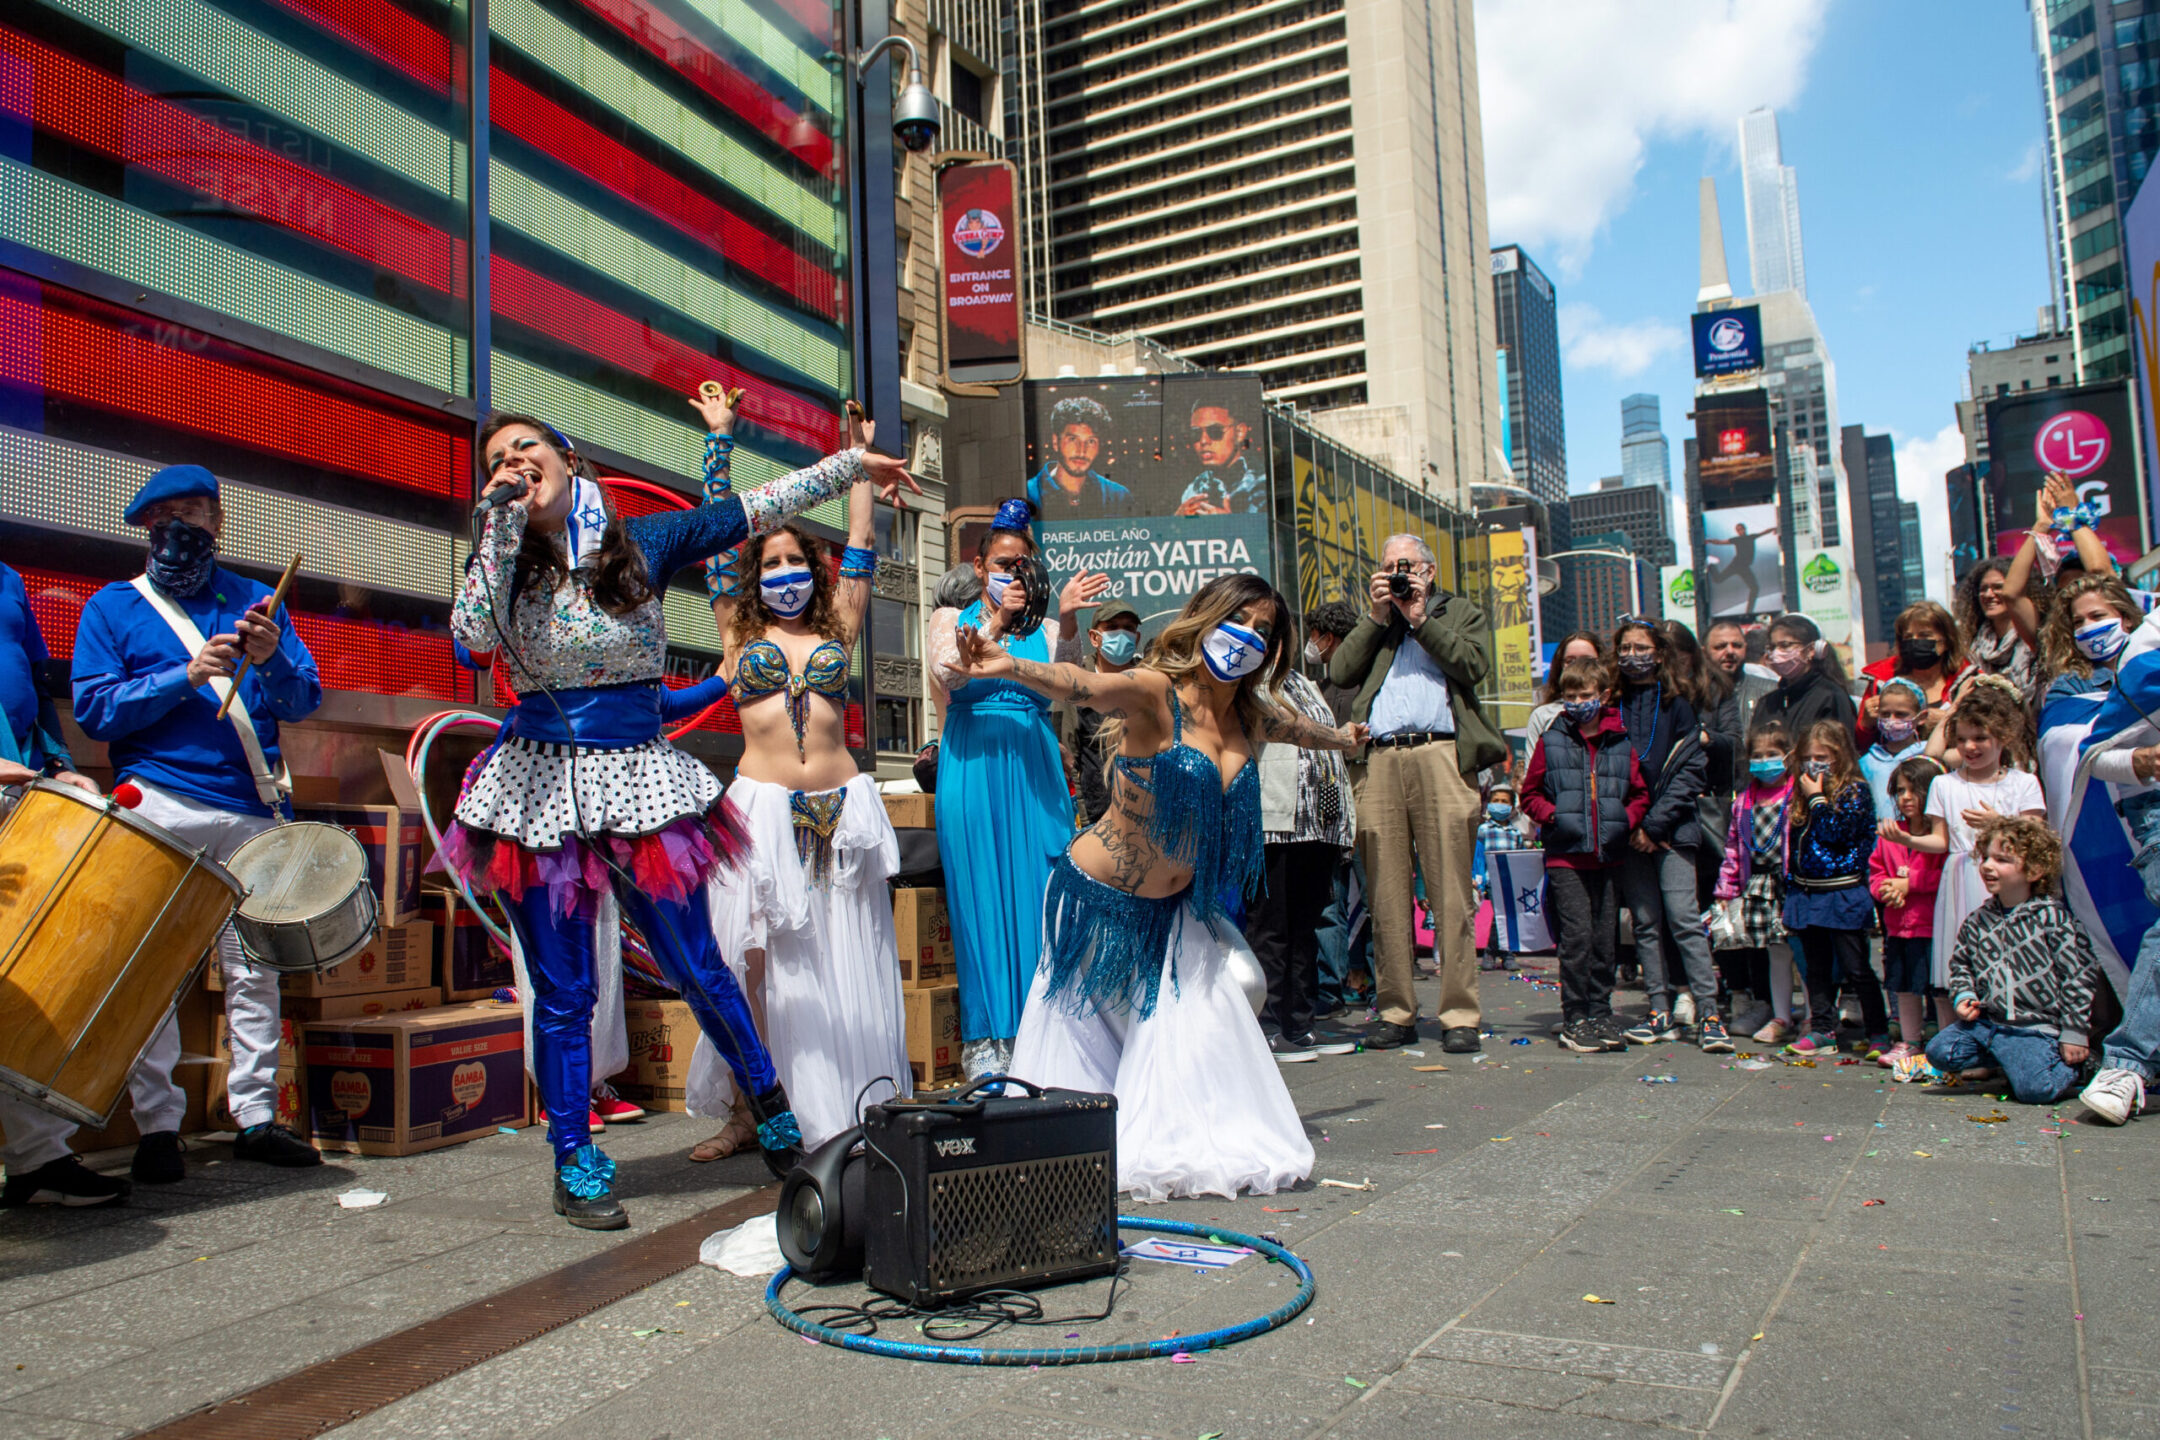 People gather to watch performers from the Independent Women Dance Troupe during celebrations marking Israel’s 73rd Yom Haatzmaut (Independence Day) in New York City’s Times Square, April 18, 2021.(Alexi Rosenfeld/Getty Images)